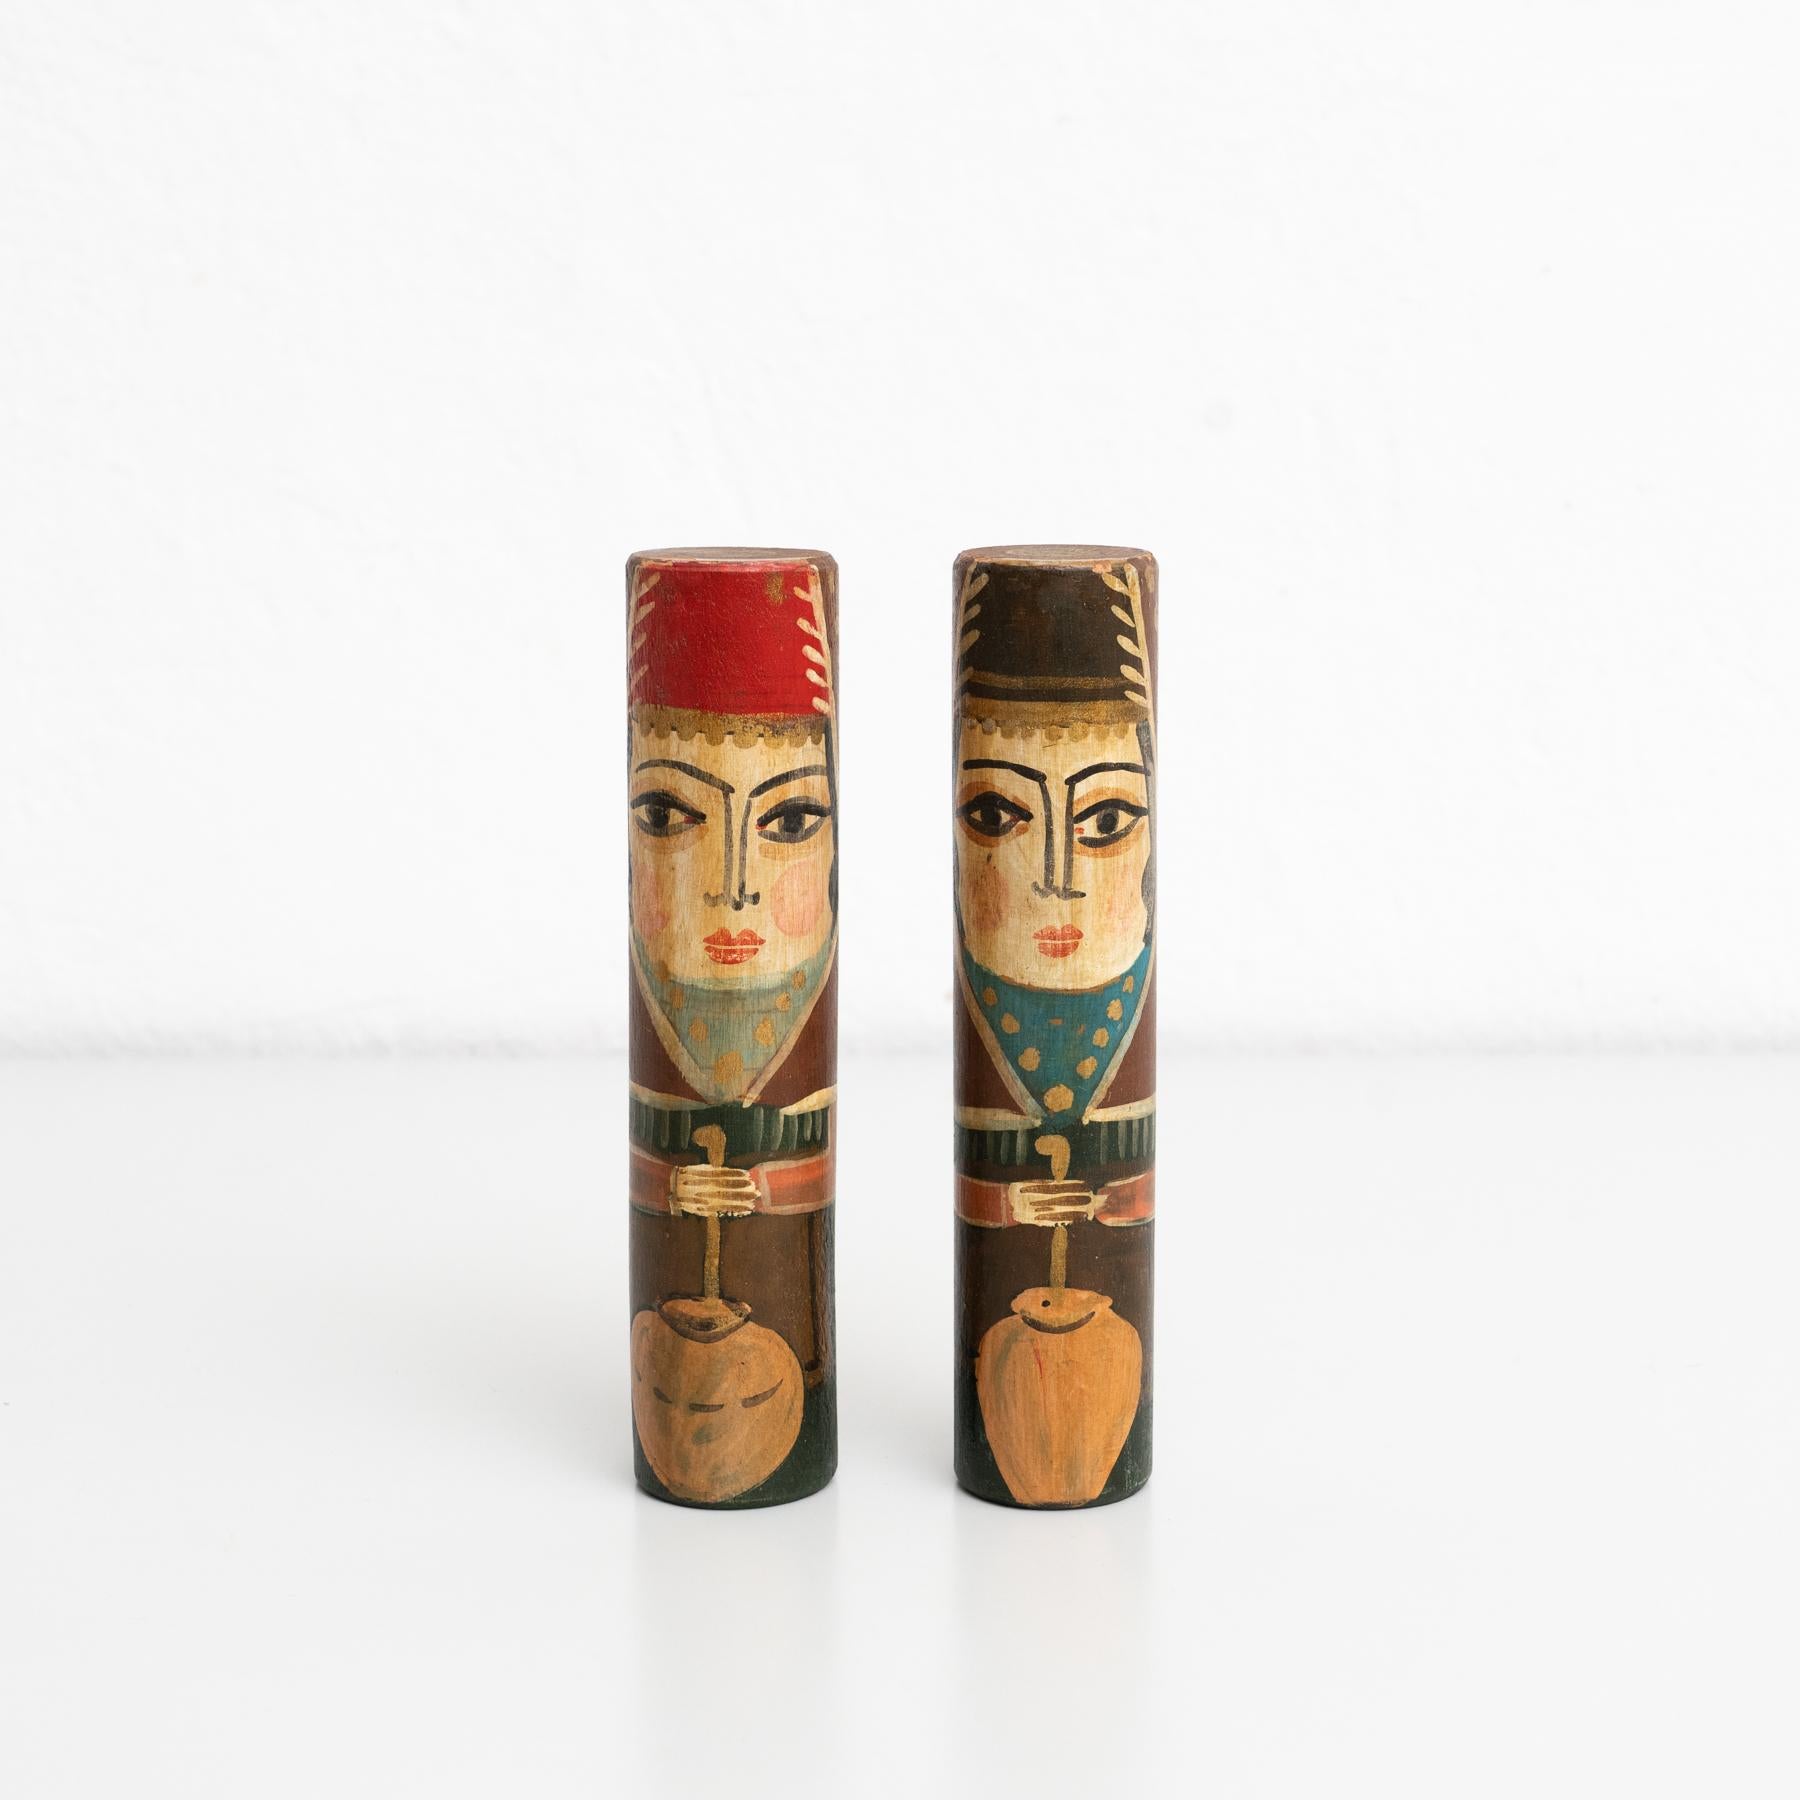 Set of two hand-painted antique figures of two men made of wood.

Explore the captivating charm of these two hand-painted antique wooden stick figures, depicting two men in traditional Middle Eastern attire. Crafted by an unknown manufacturer in